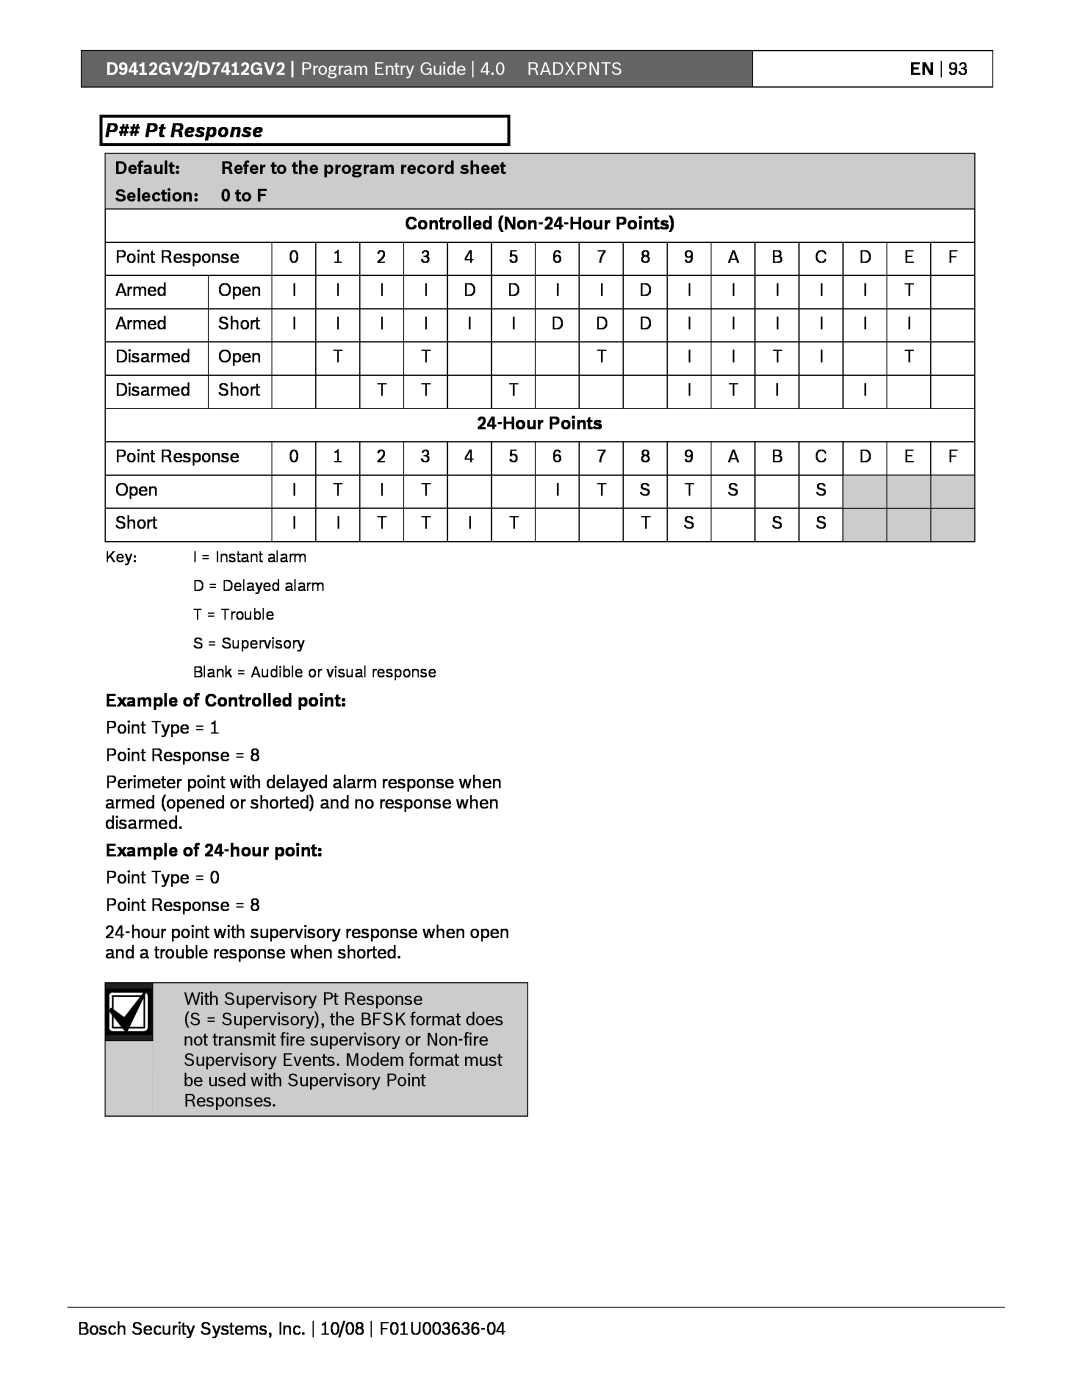 Bosch Appliances D9412GV2 manual P## Pt Response, Default, Refer to the program record sheet, Selection, to F, HourPoints 